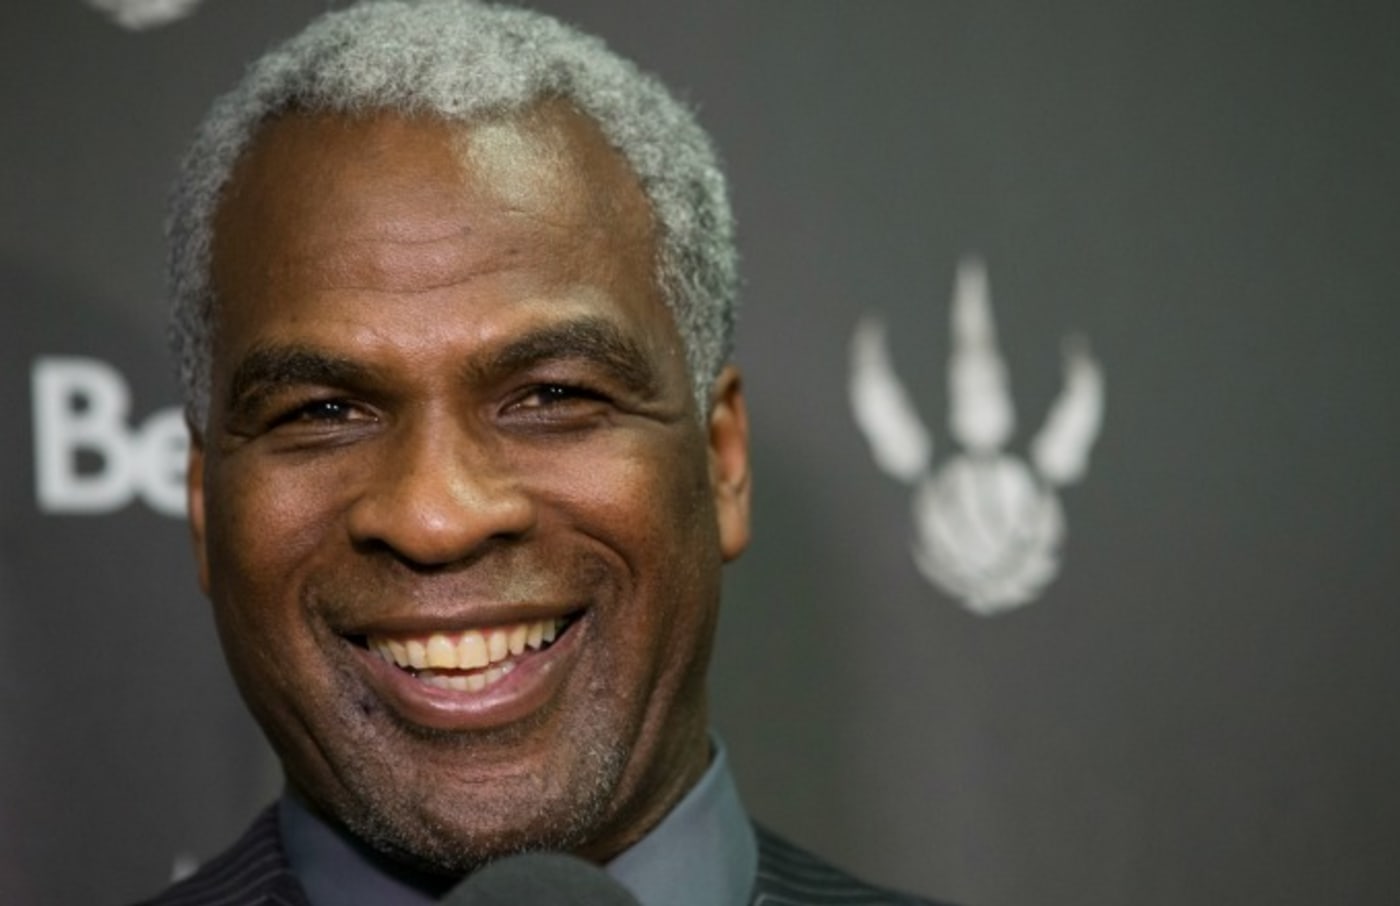 Charles Oakley laughs during a press conference.